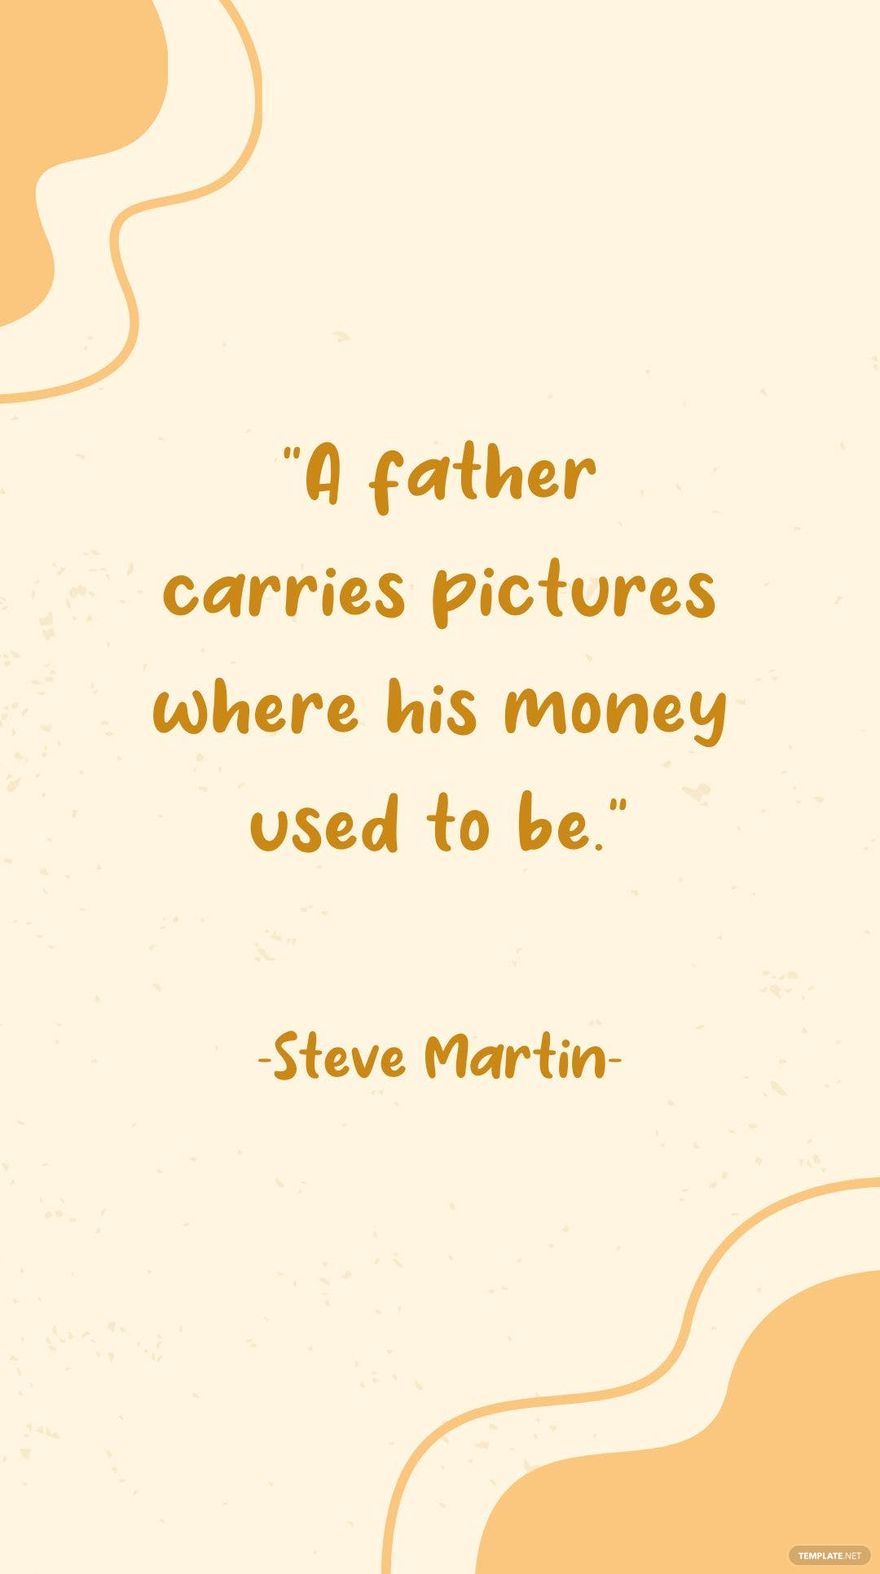 Free Steve Martin - A father carries pictures where his money used to be.